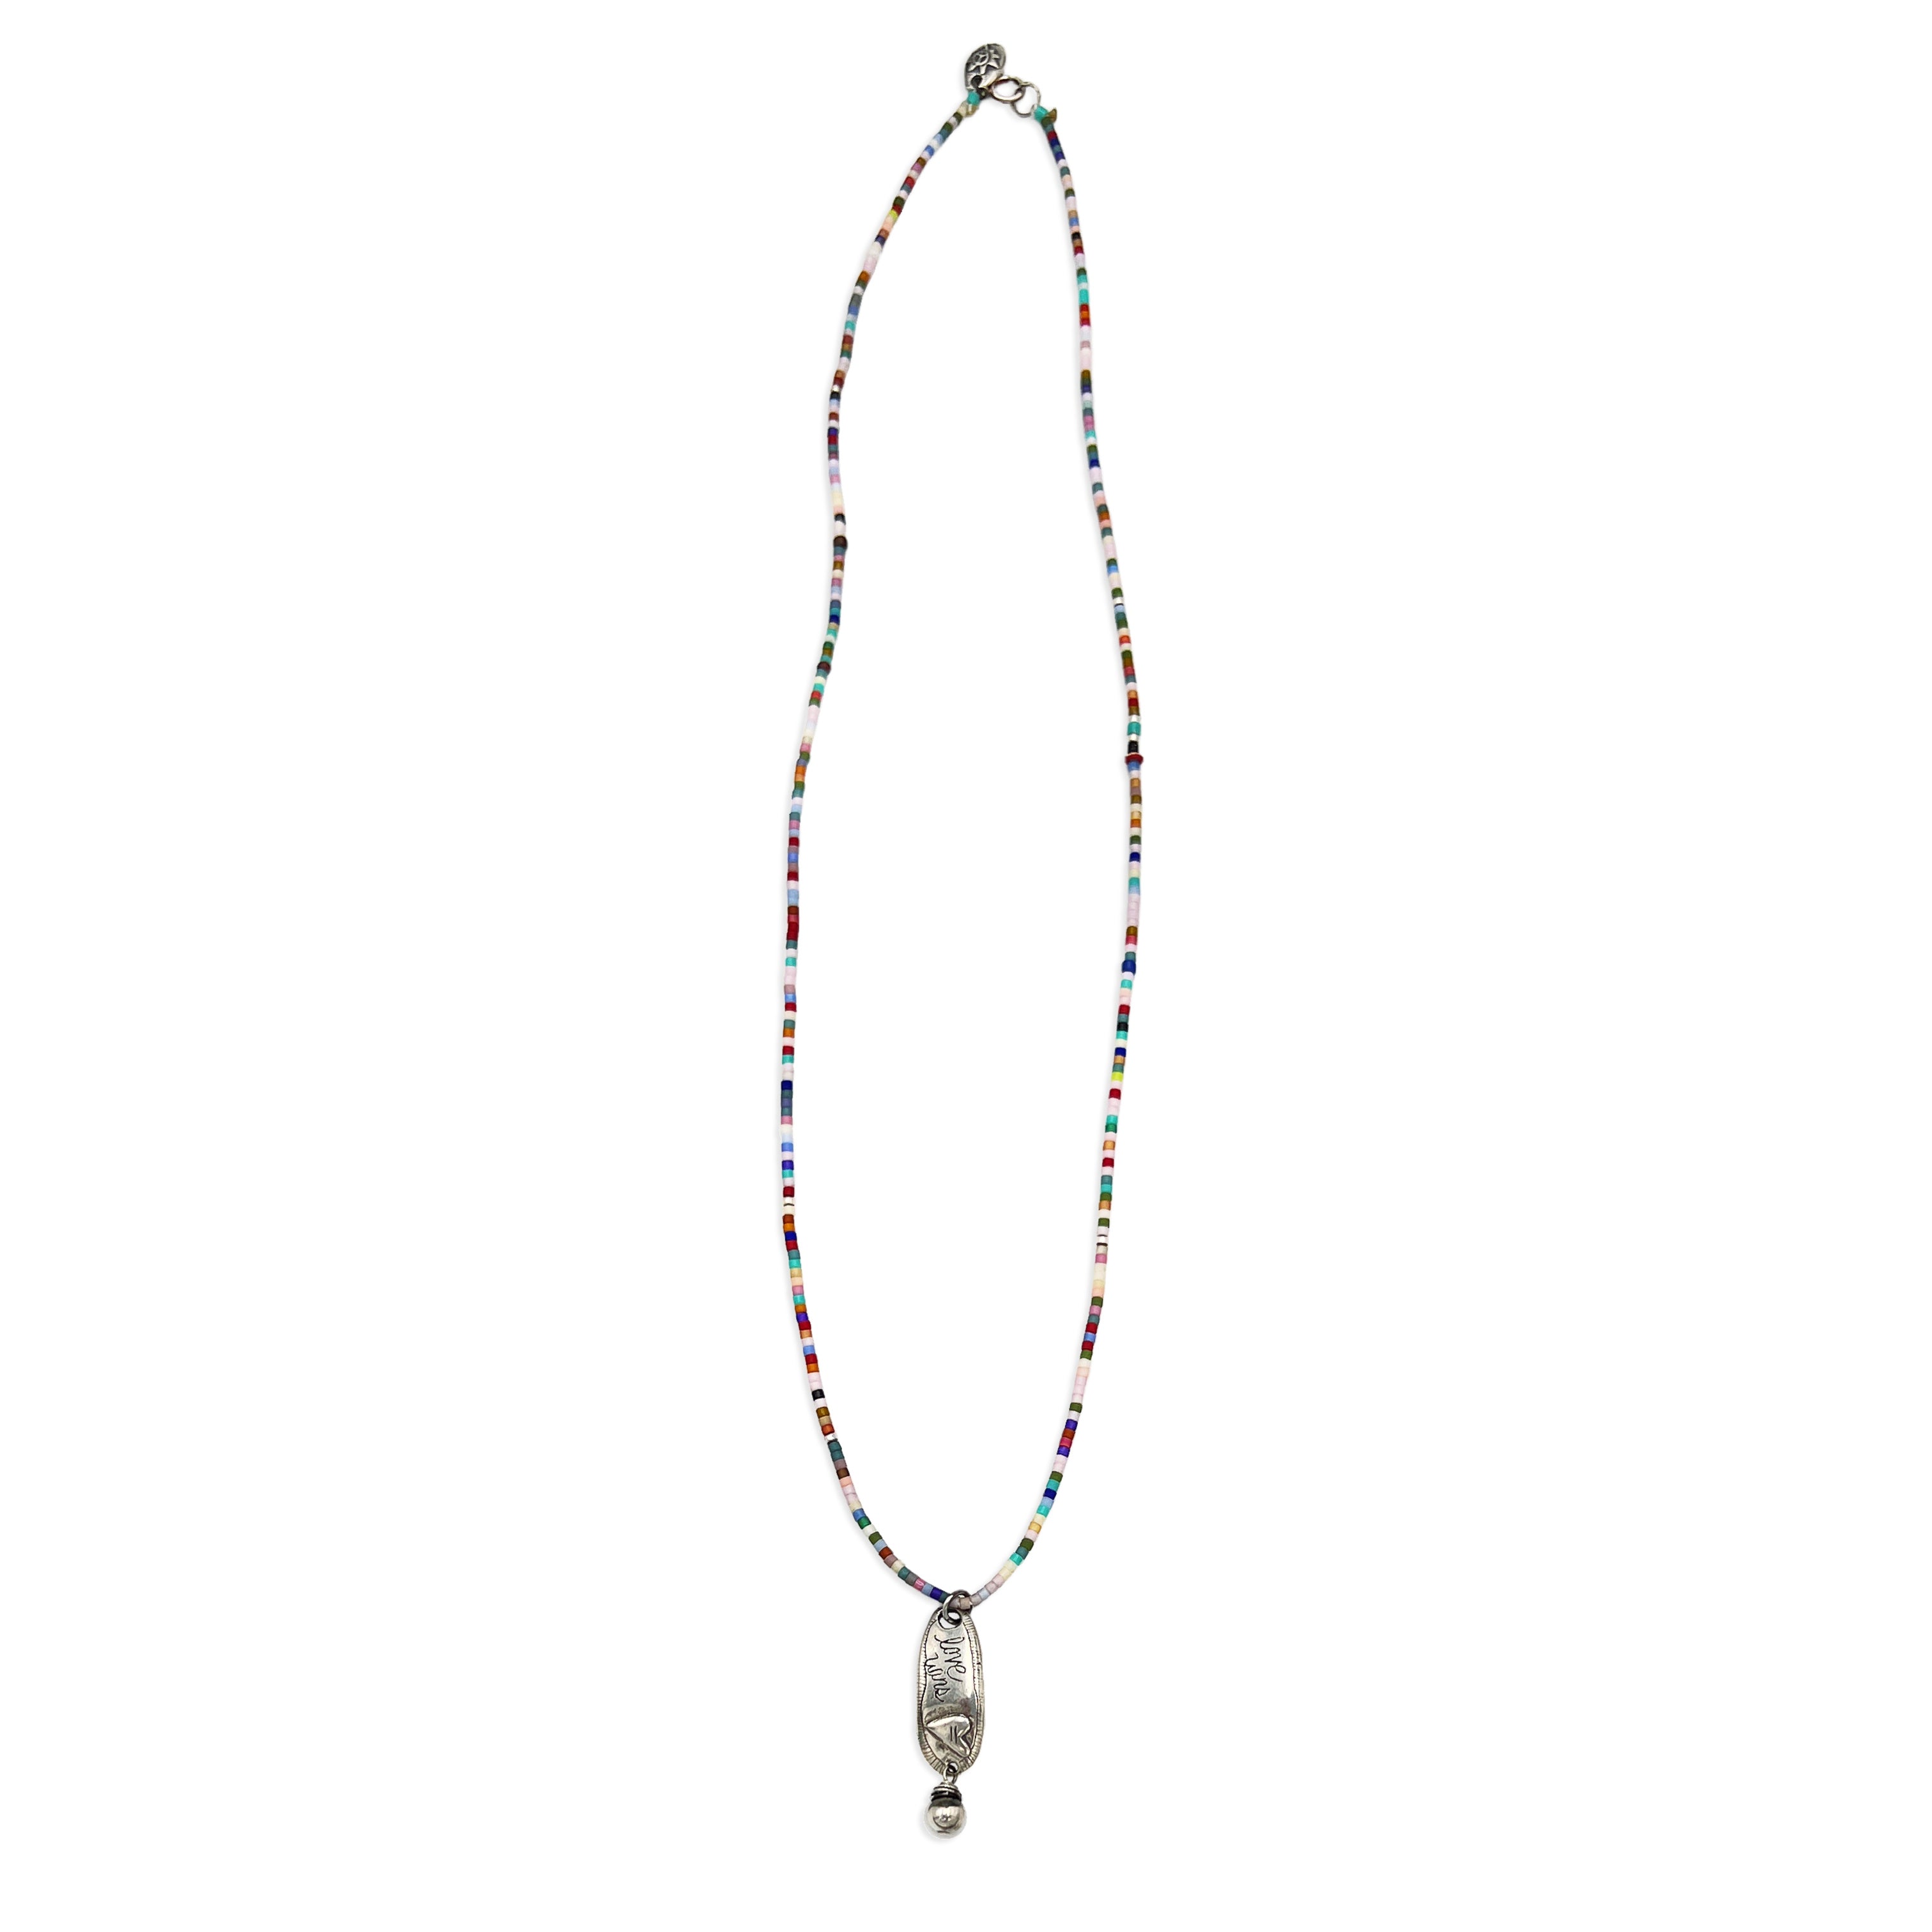 Beaded Love Wins Necklace